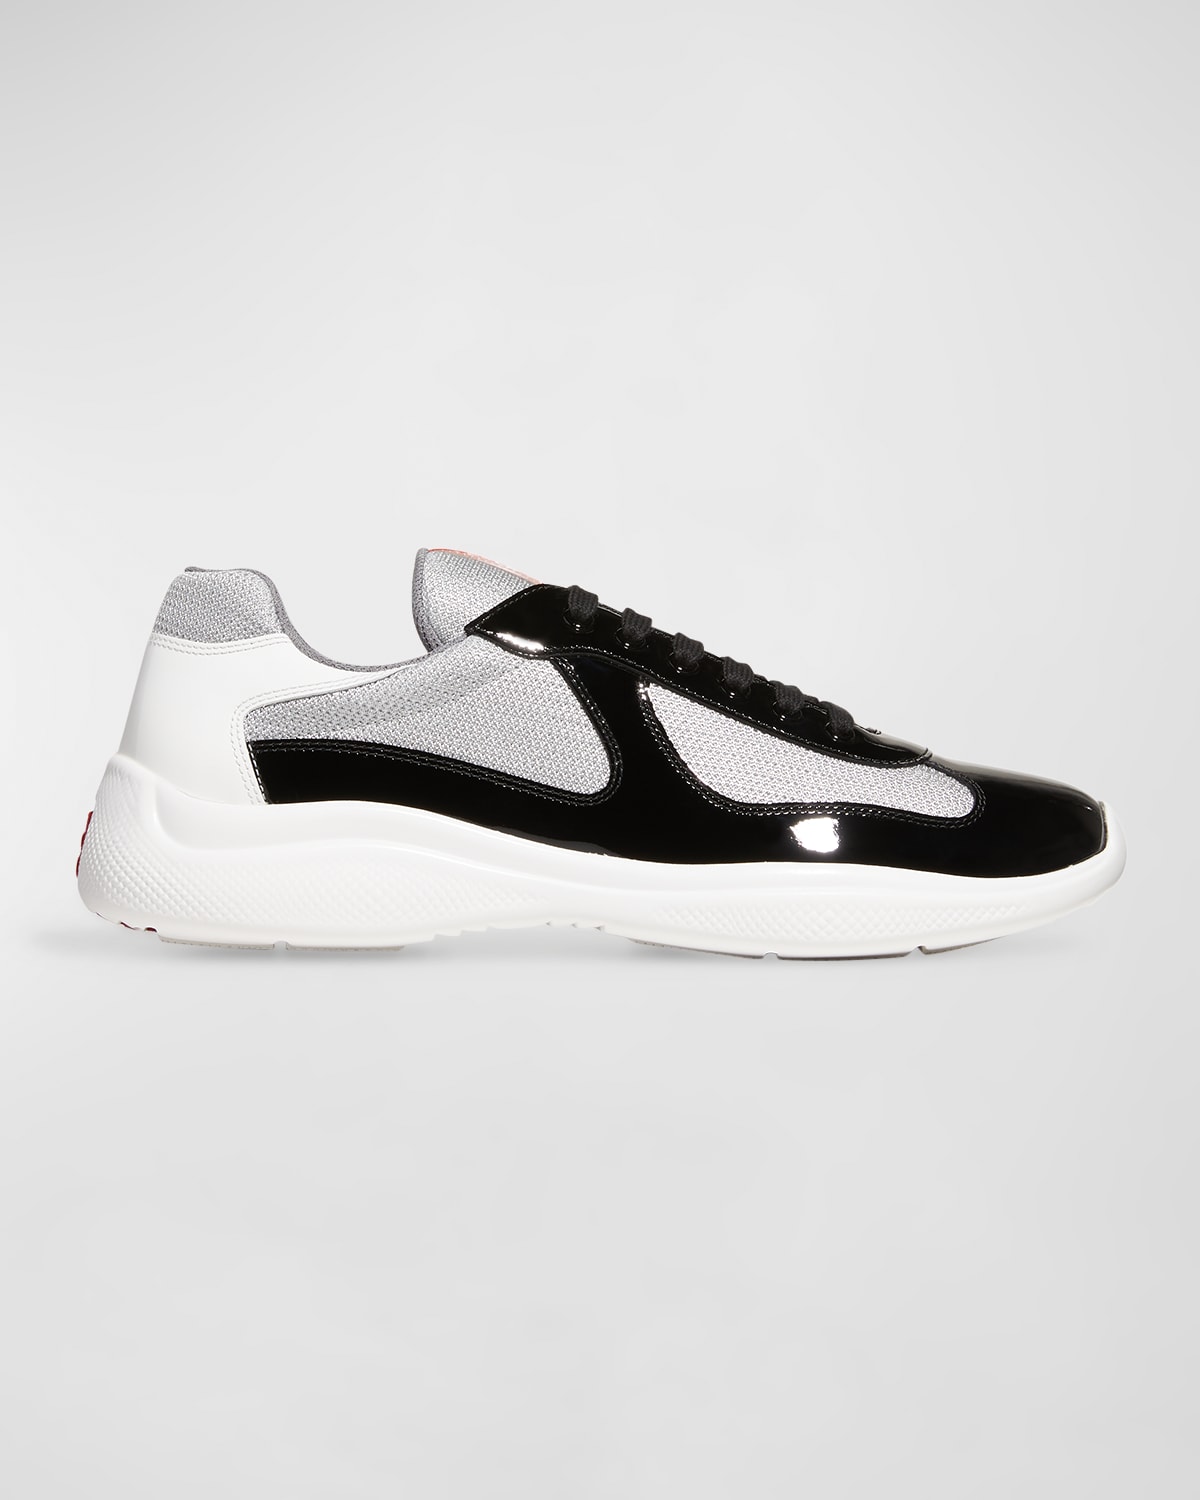 Prada Men's New America's Cup Leather Low-top Sneakers In Nero/bianco